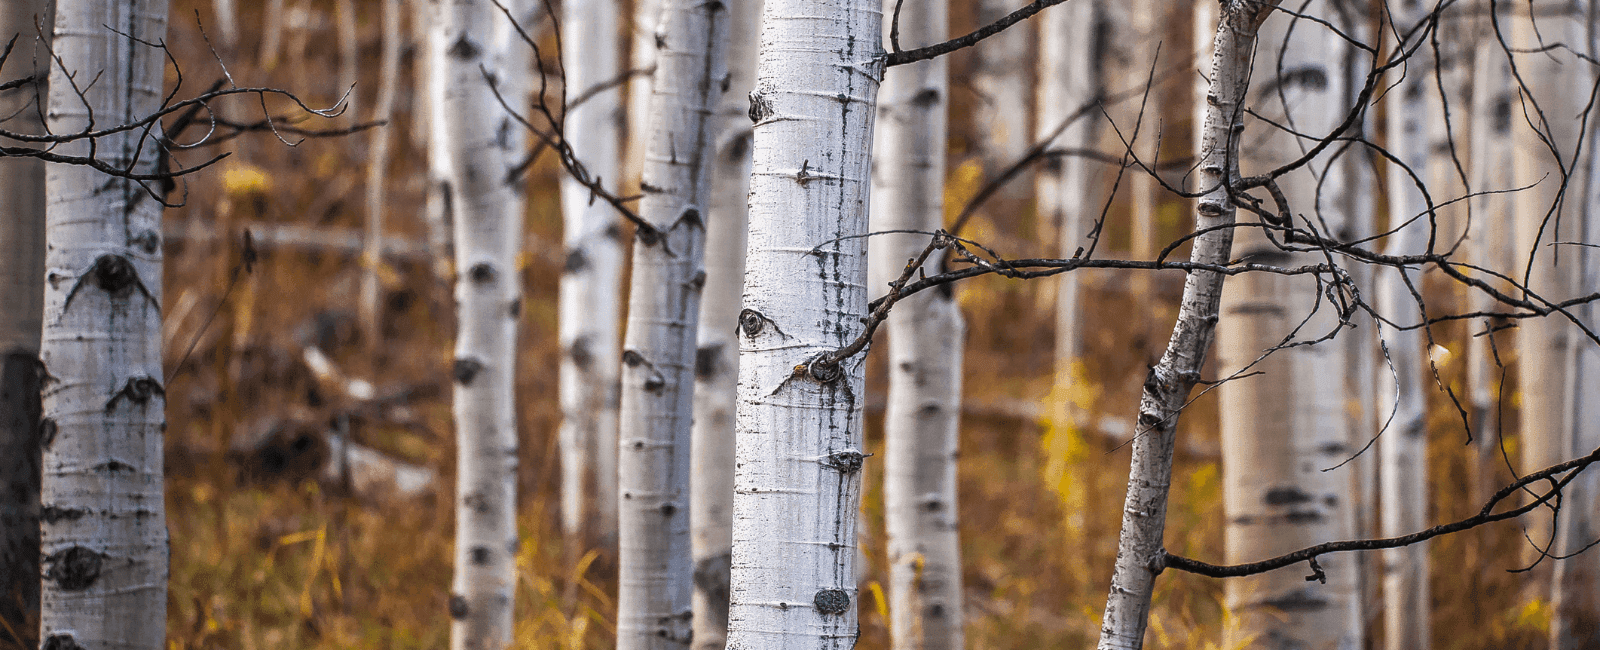 Aspen Groves and Fungal Allies Threatened by Climate Change